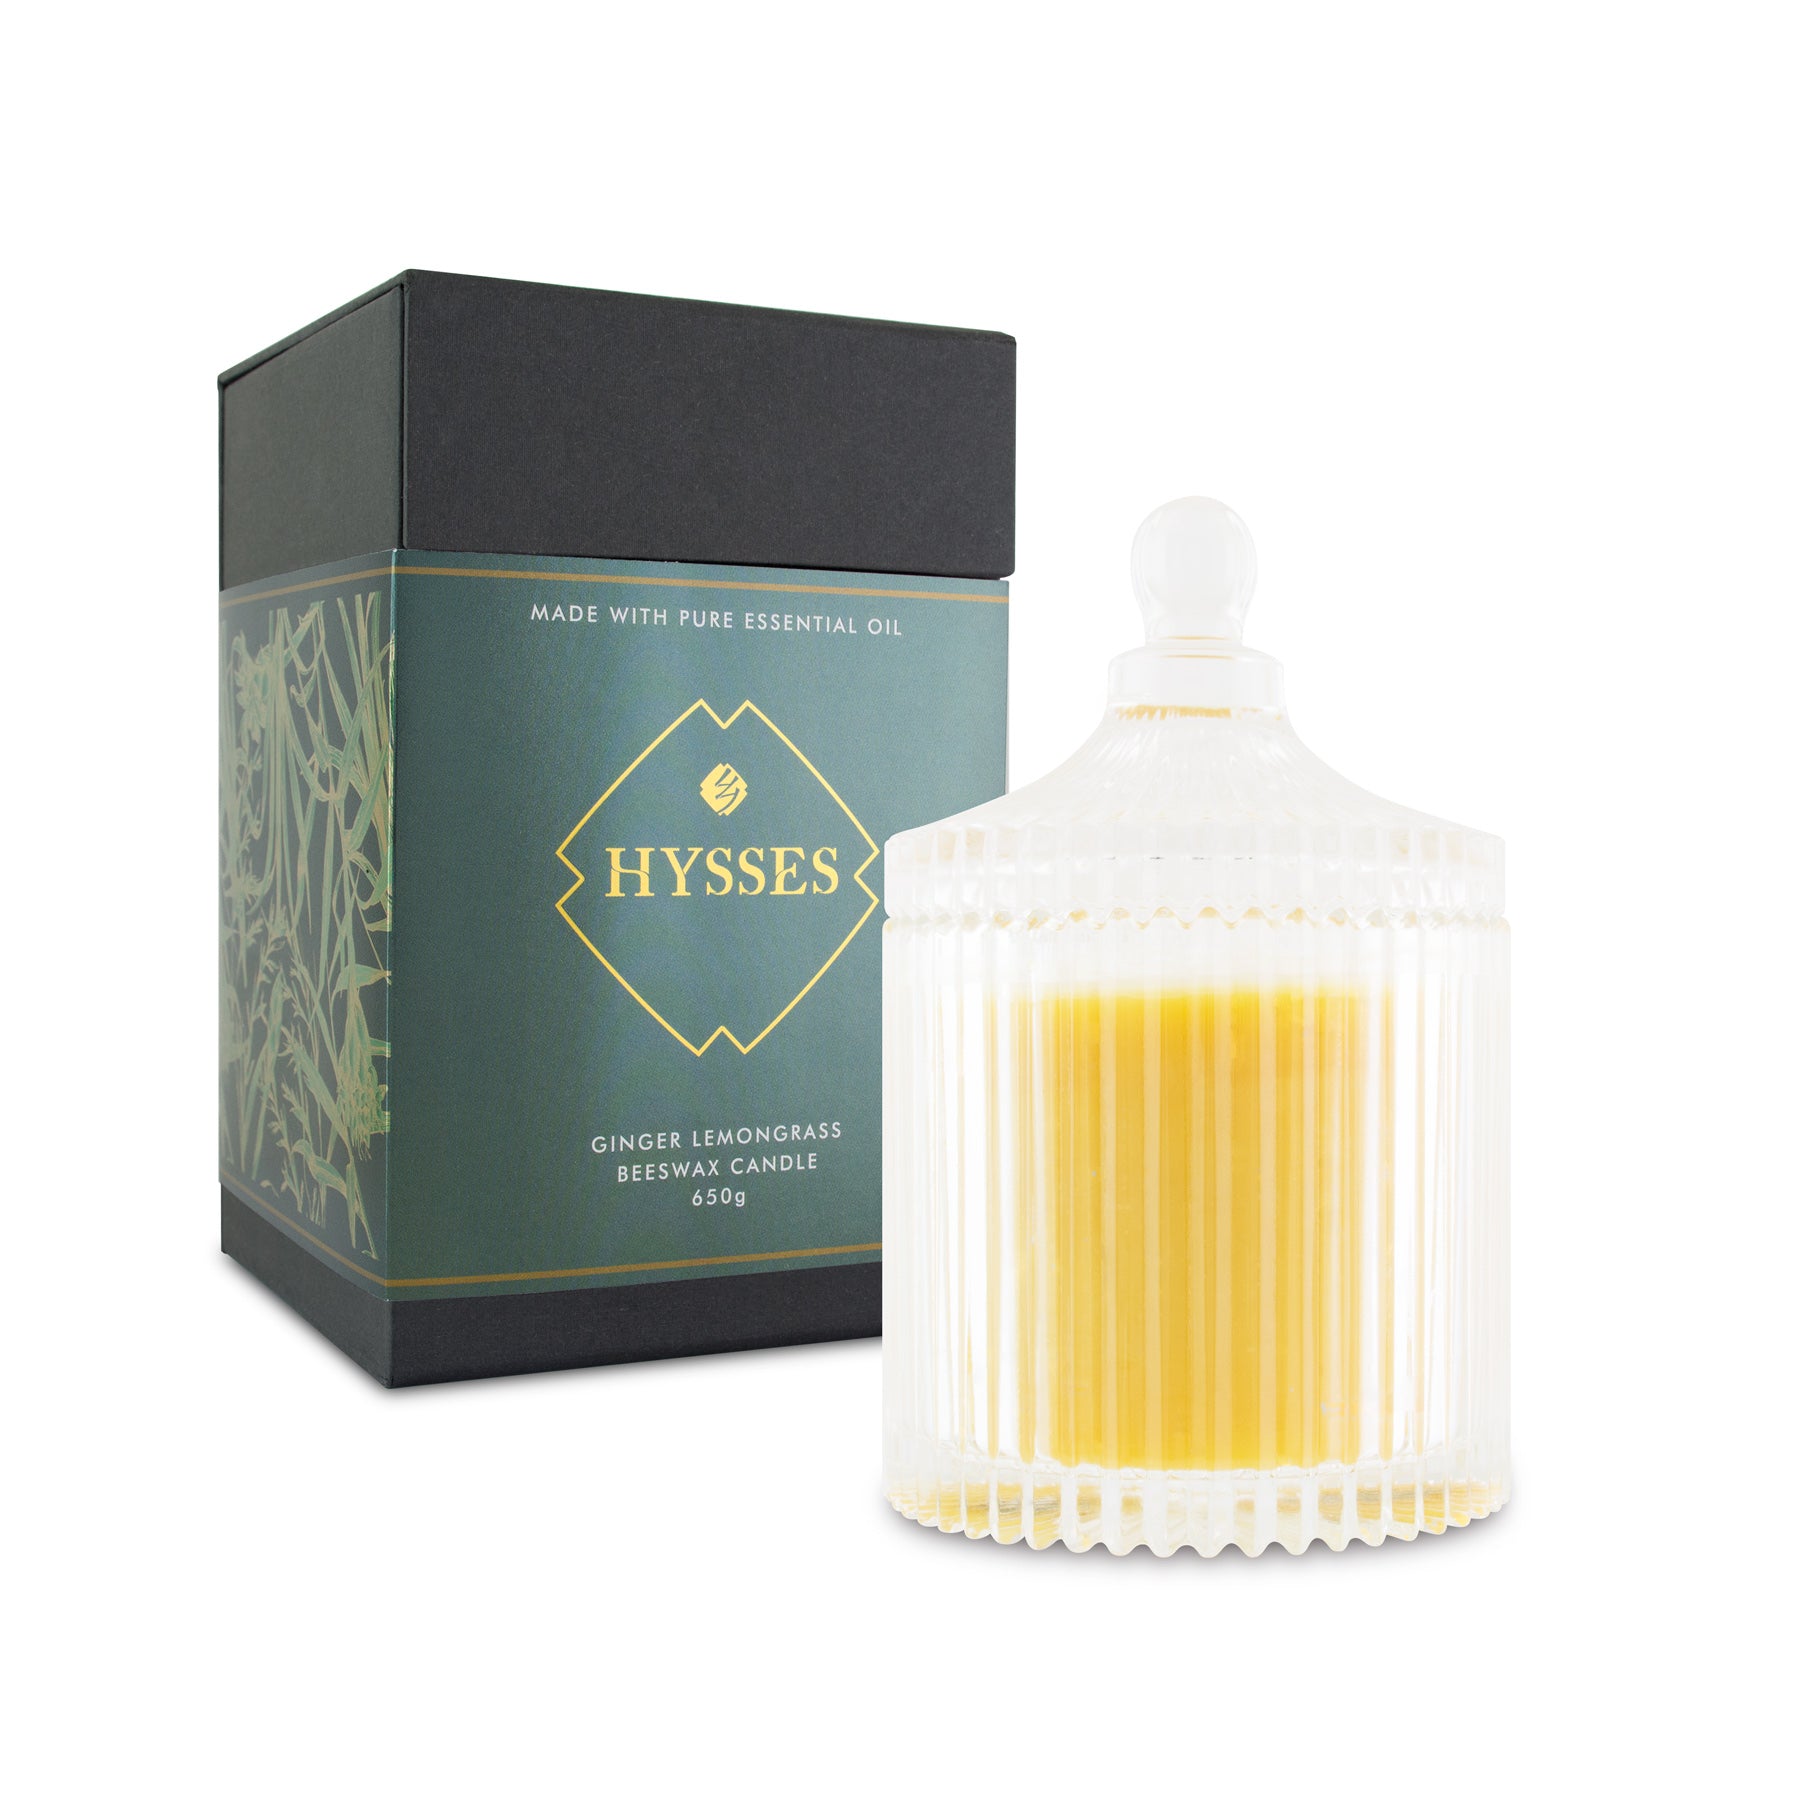 Ginger Lemongrass Beeswax Candle - HYSSES